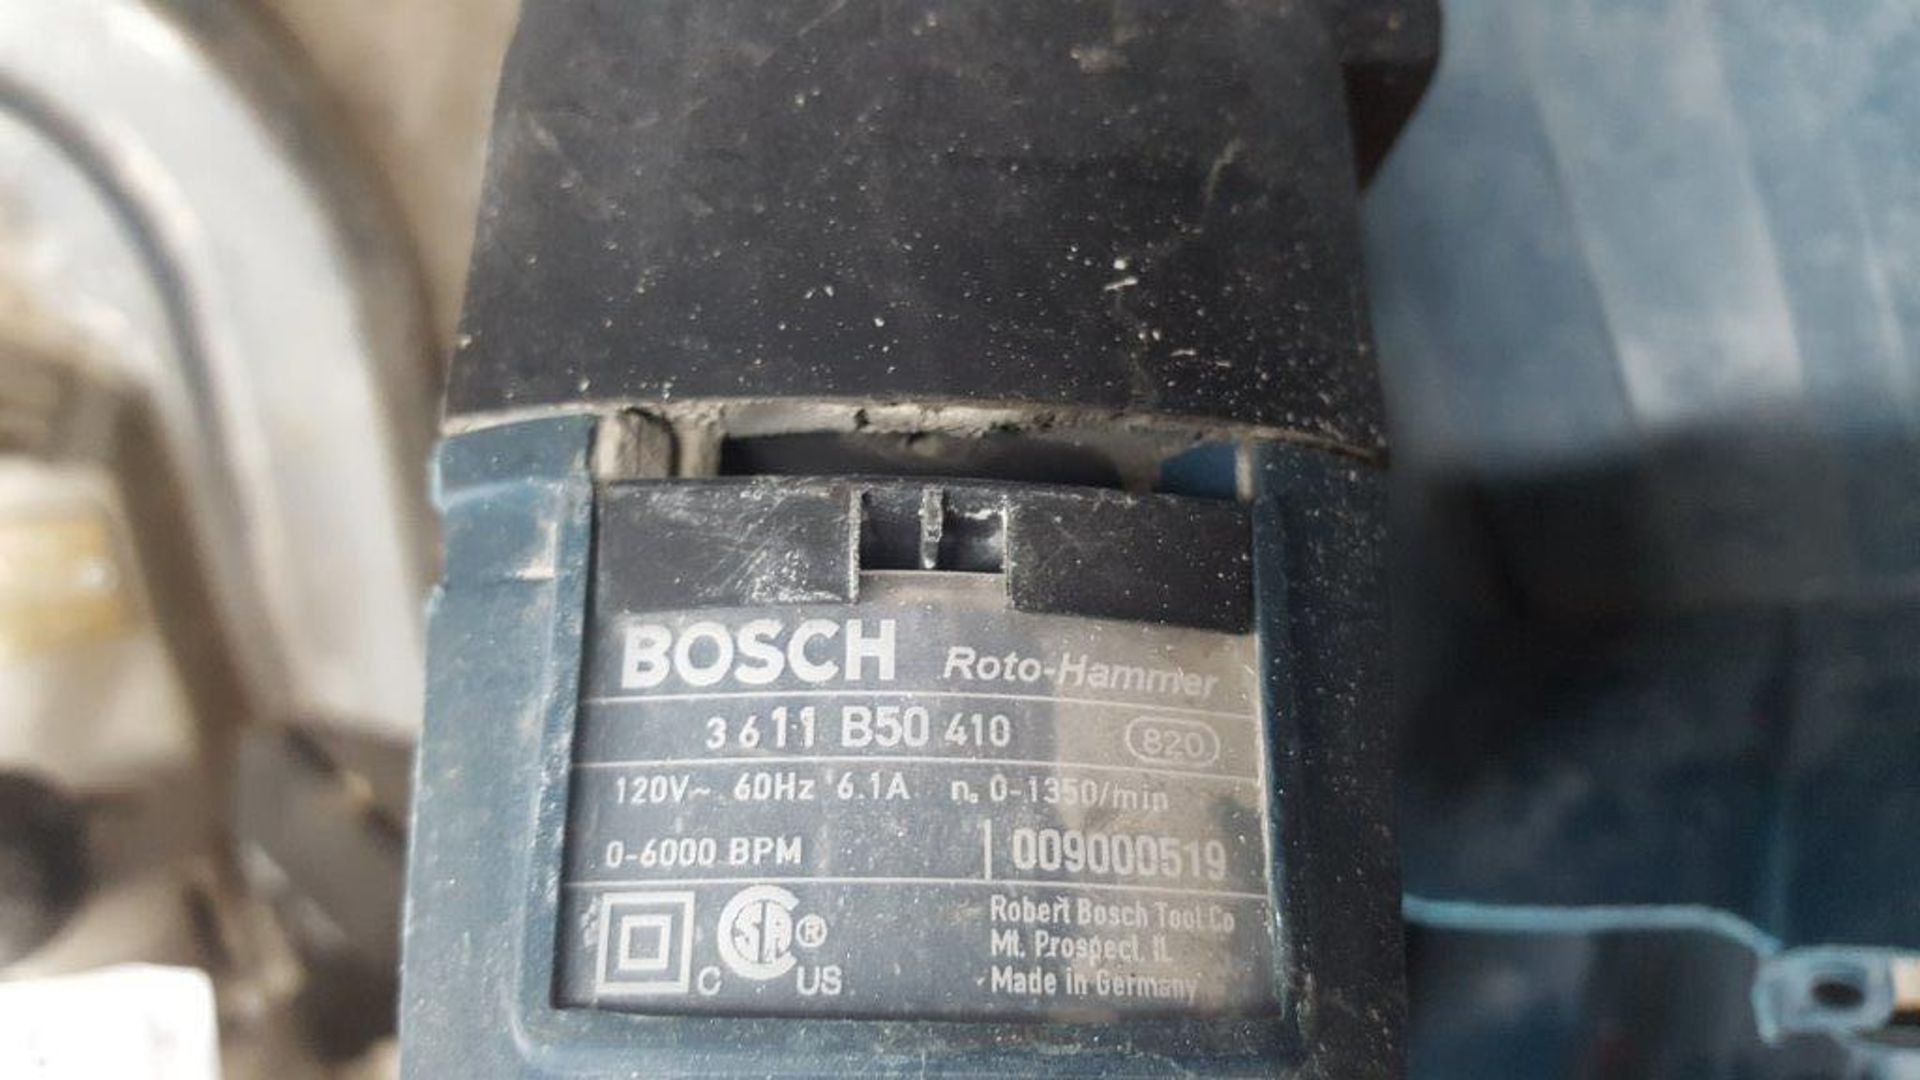 Bosch roto-hammer with case - Image 3 of 3